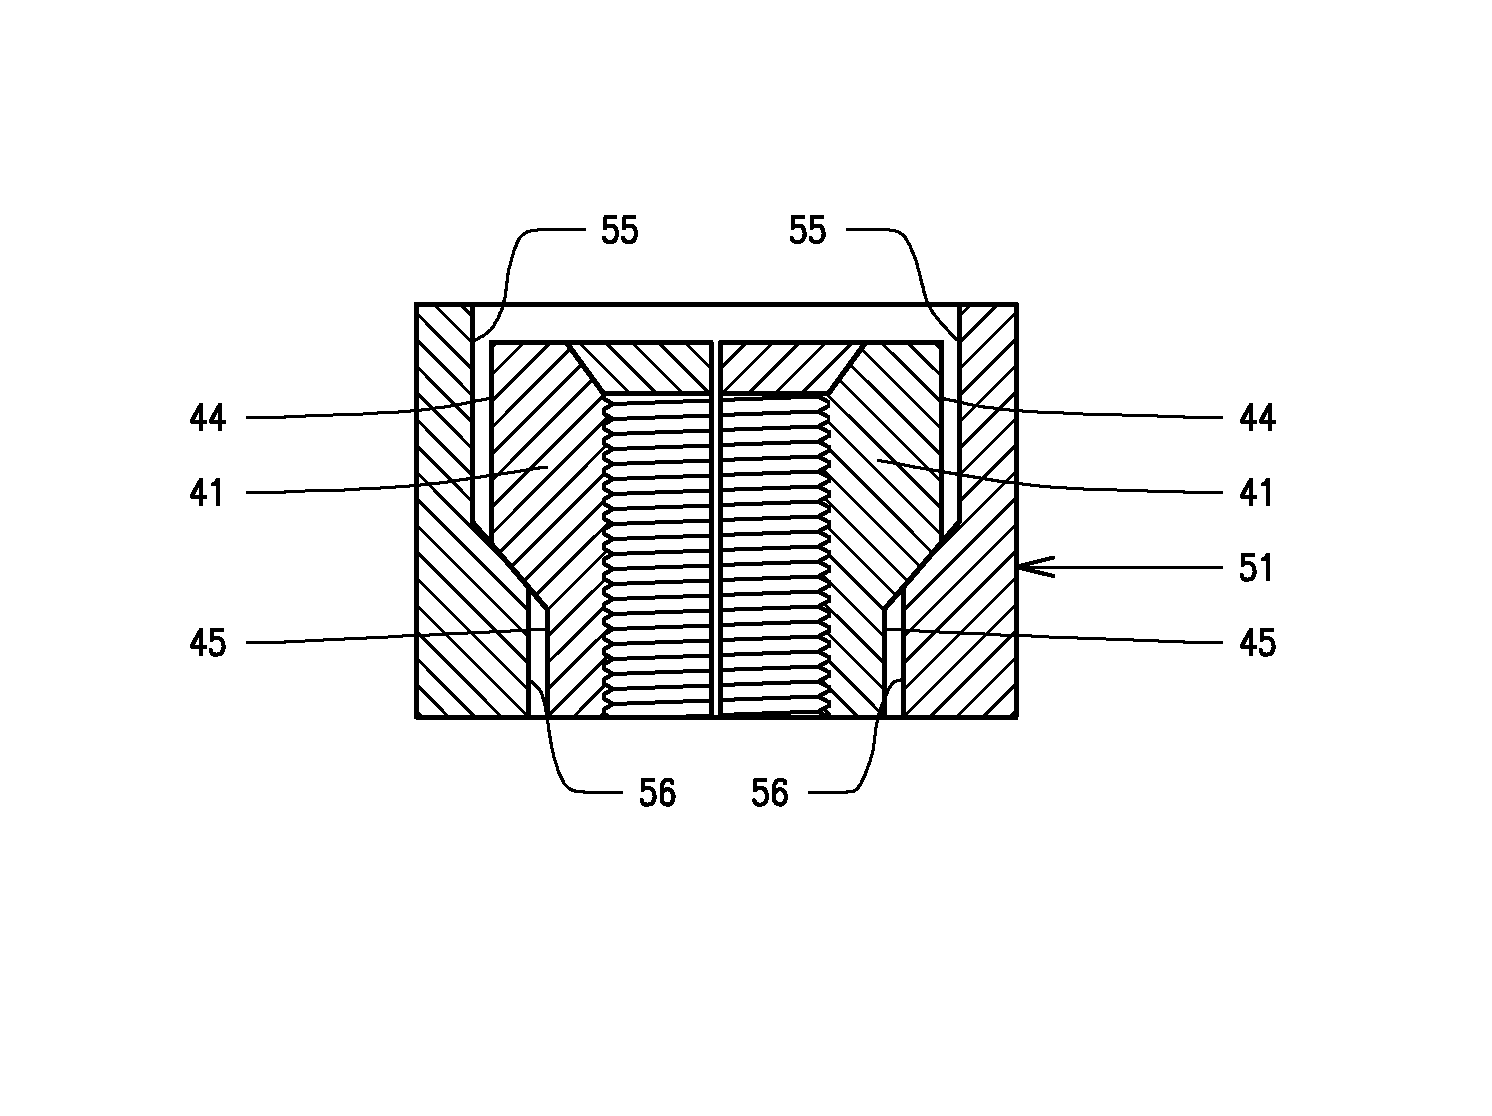 Ratcheting-type shrinkage compensating device for use in continuous tie-down systems